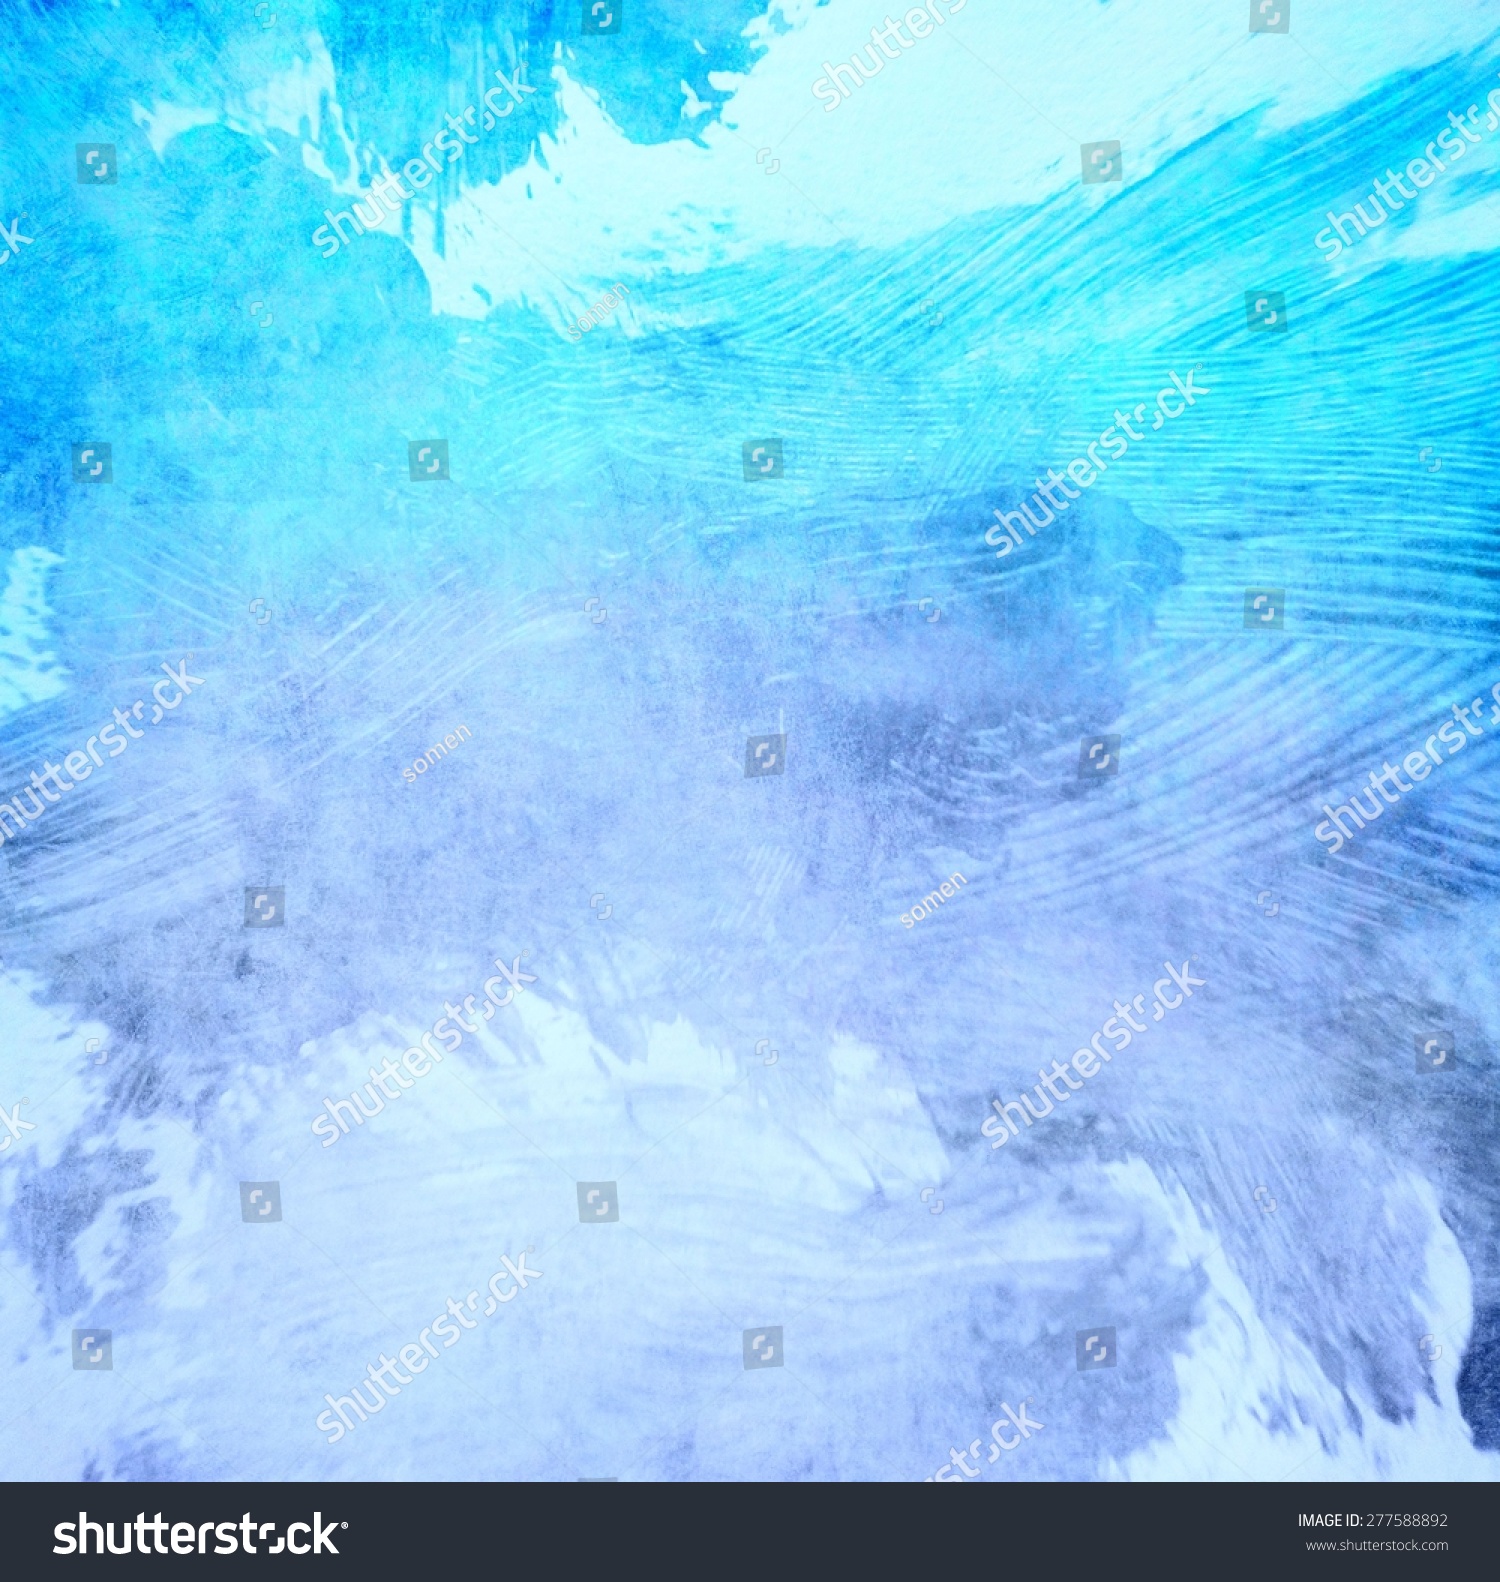 Grunge abstract background #277588892